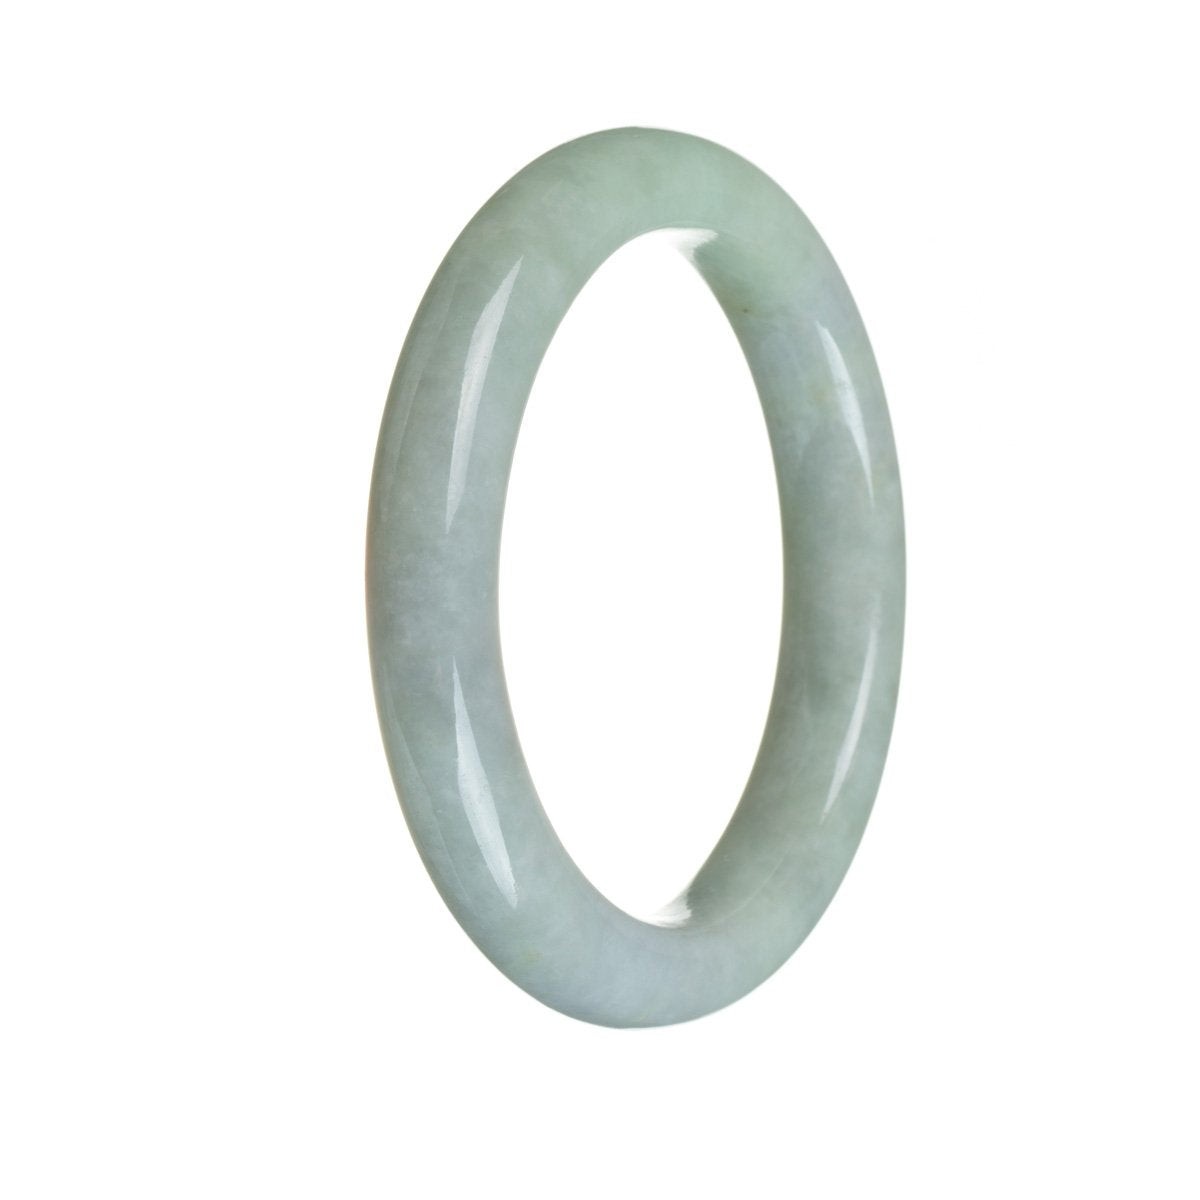 An elegant pale green and lavender jade bangle with a semi-round shape, measuring 57mm.